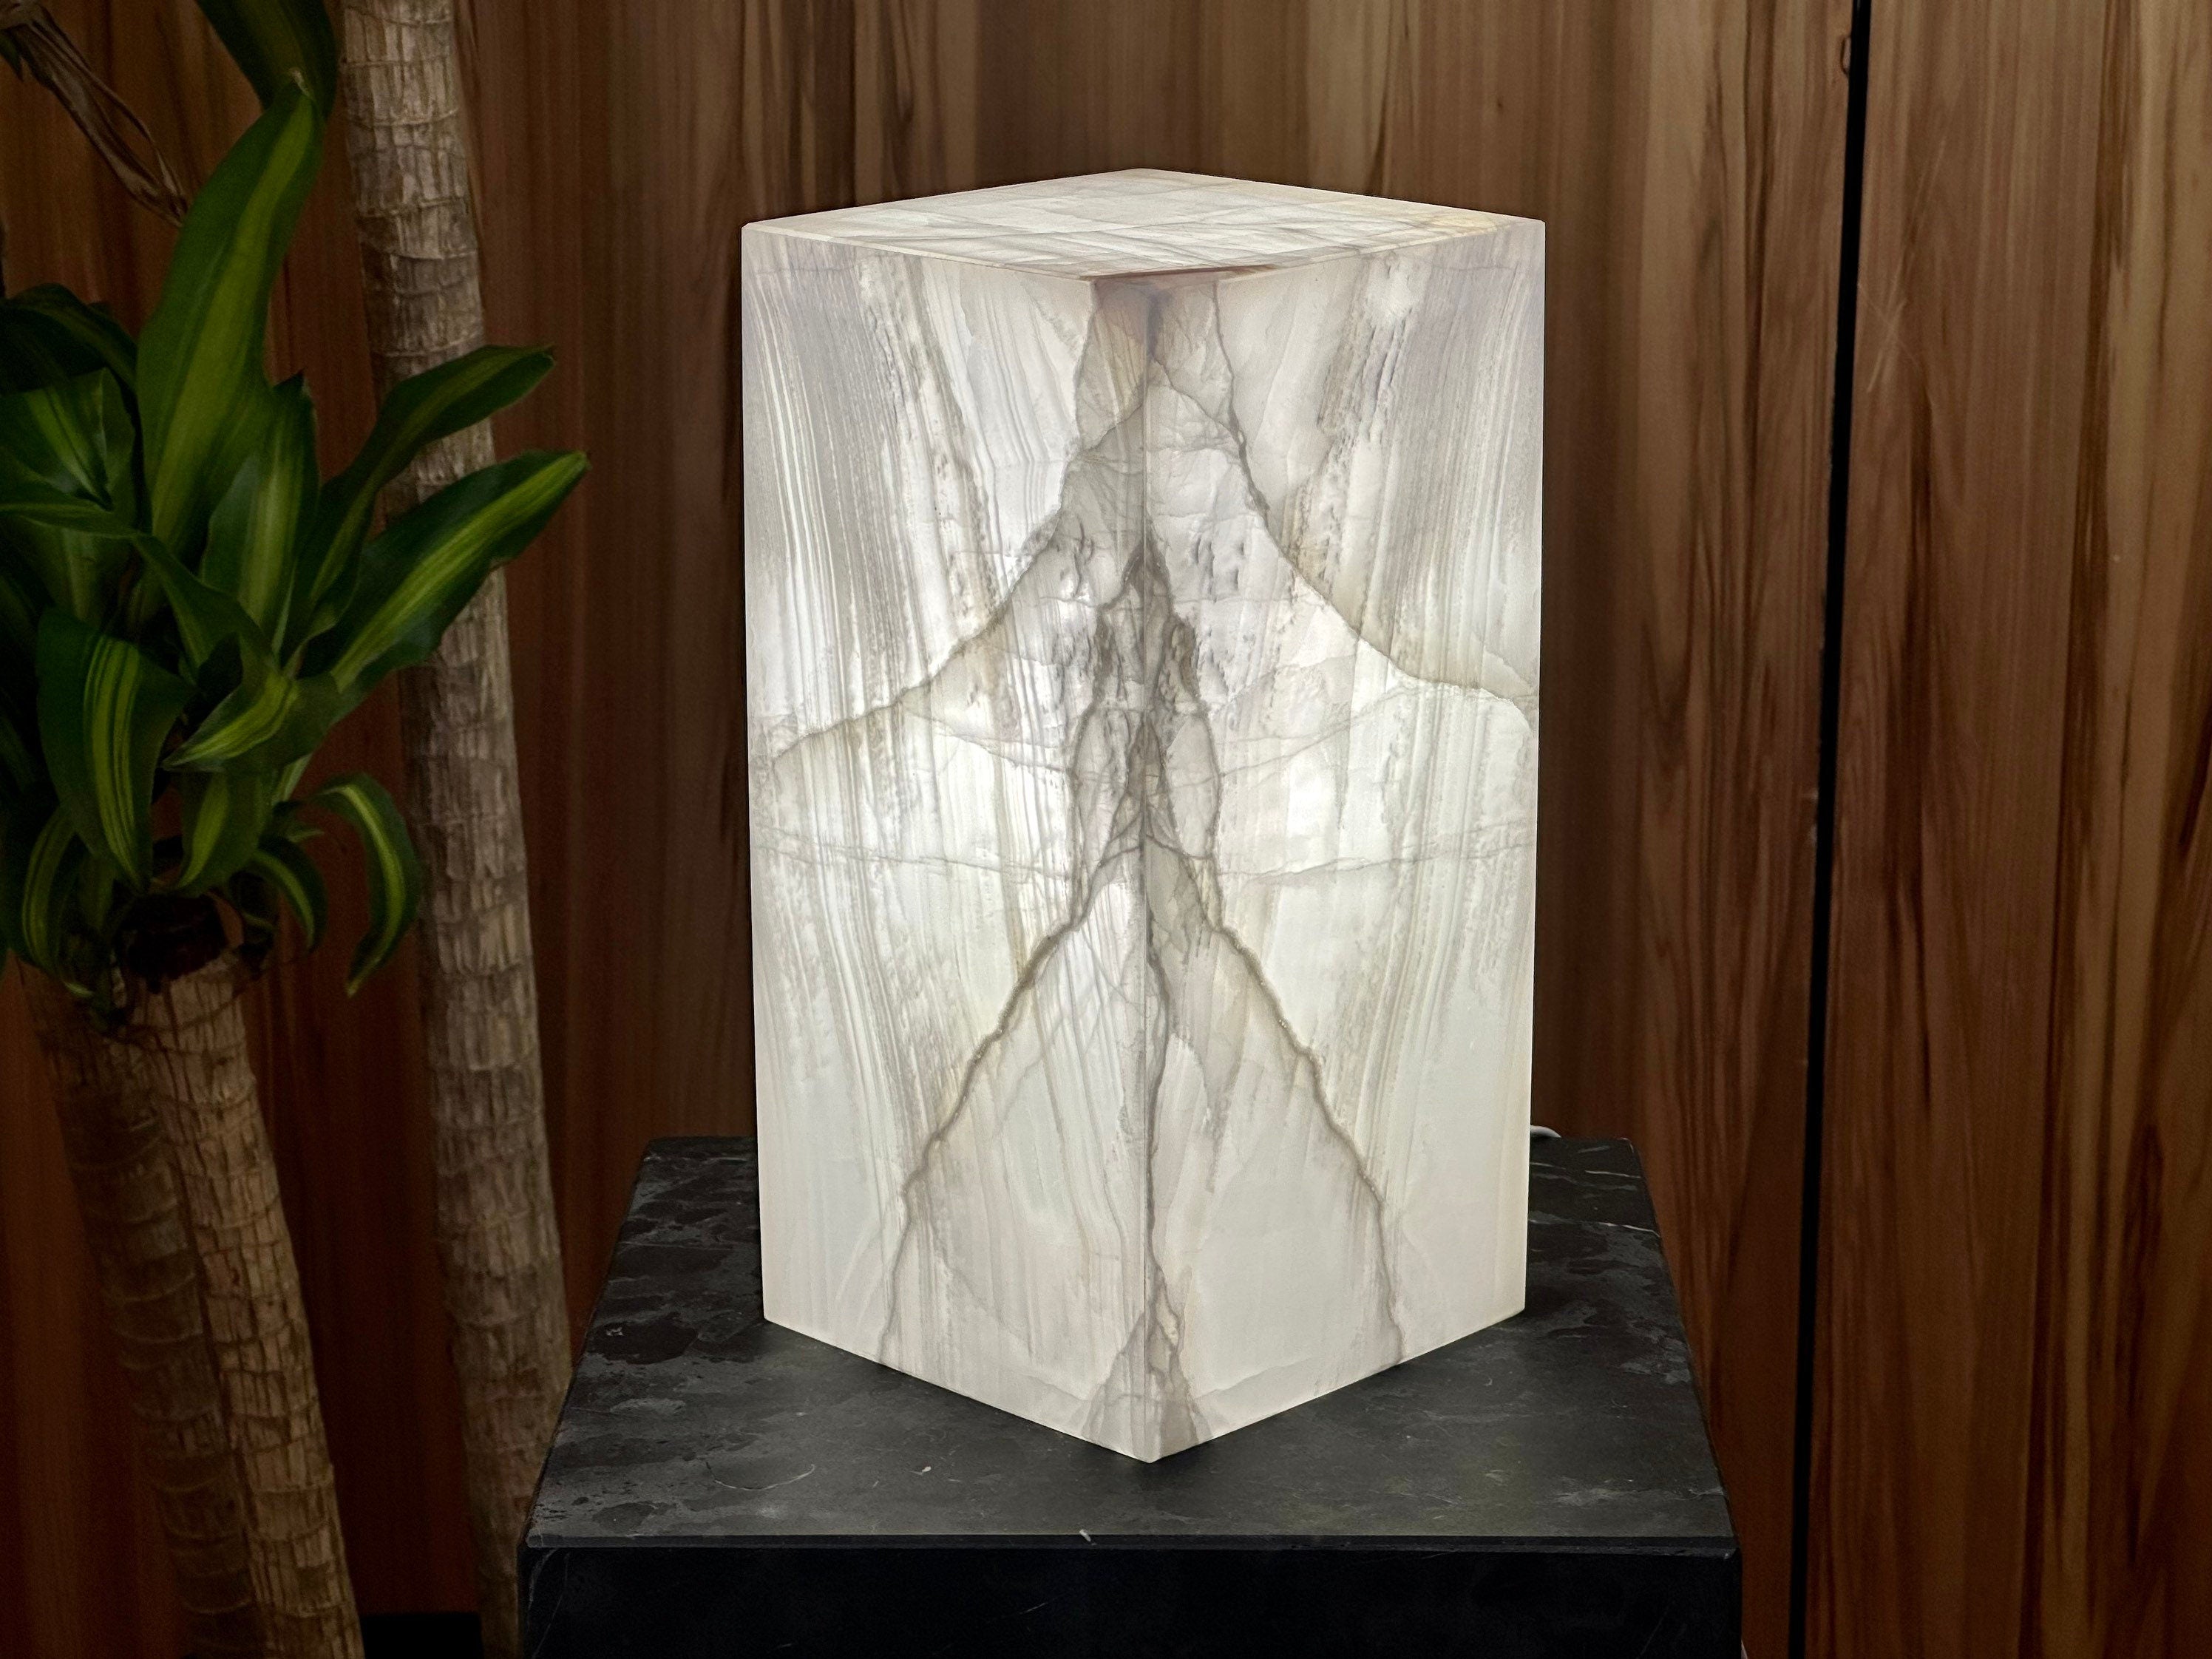 Elegant Onyx Desk Lamp - Modern and Chic Handcrafted Table Lamp for Office, Study, or Nightstand, Perfect Gift for Any Occasion